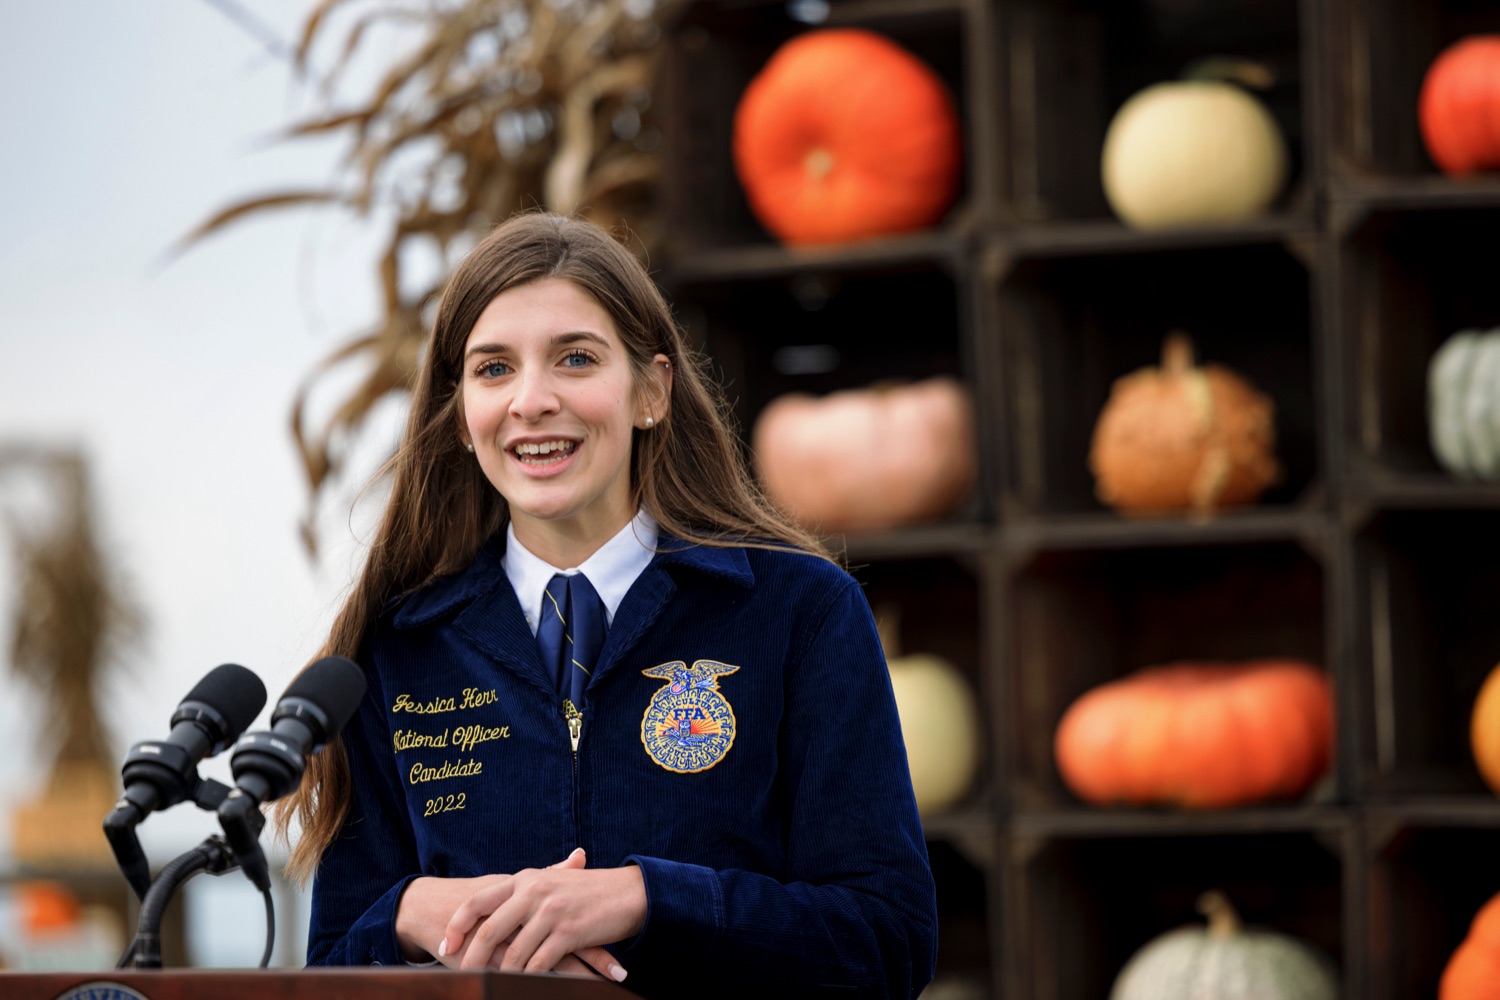 PSU College of Ag Sciences student elected Secretary of National FFA officer team